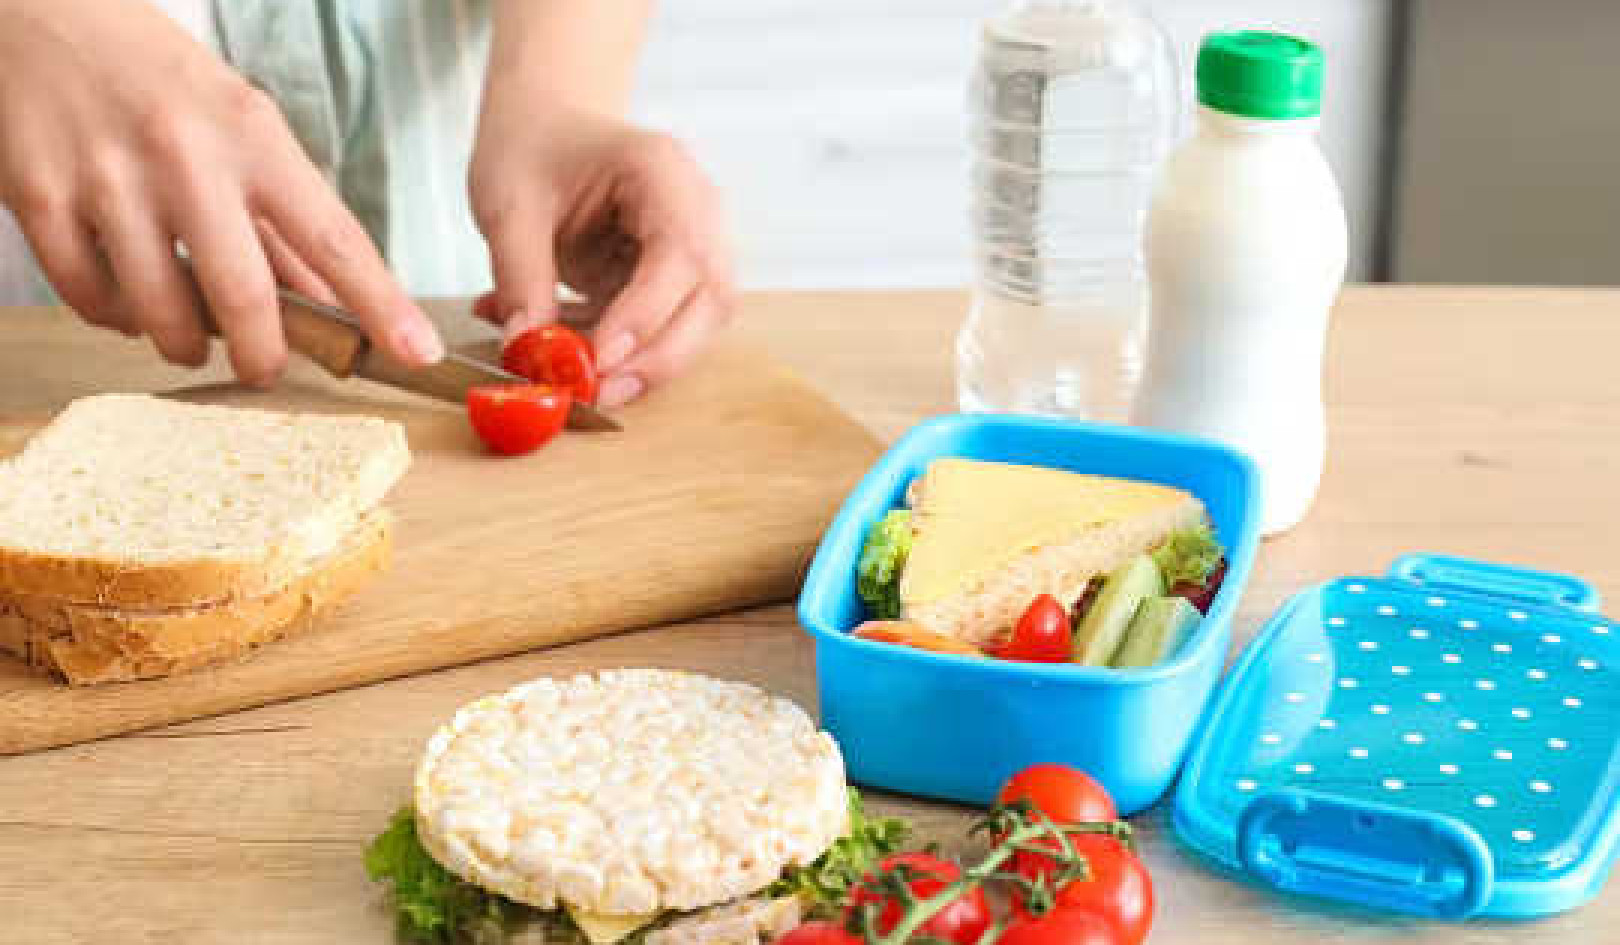 Here's How To Make Packing School Lunches Easier